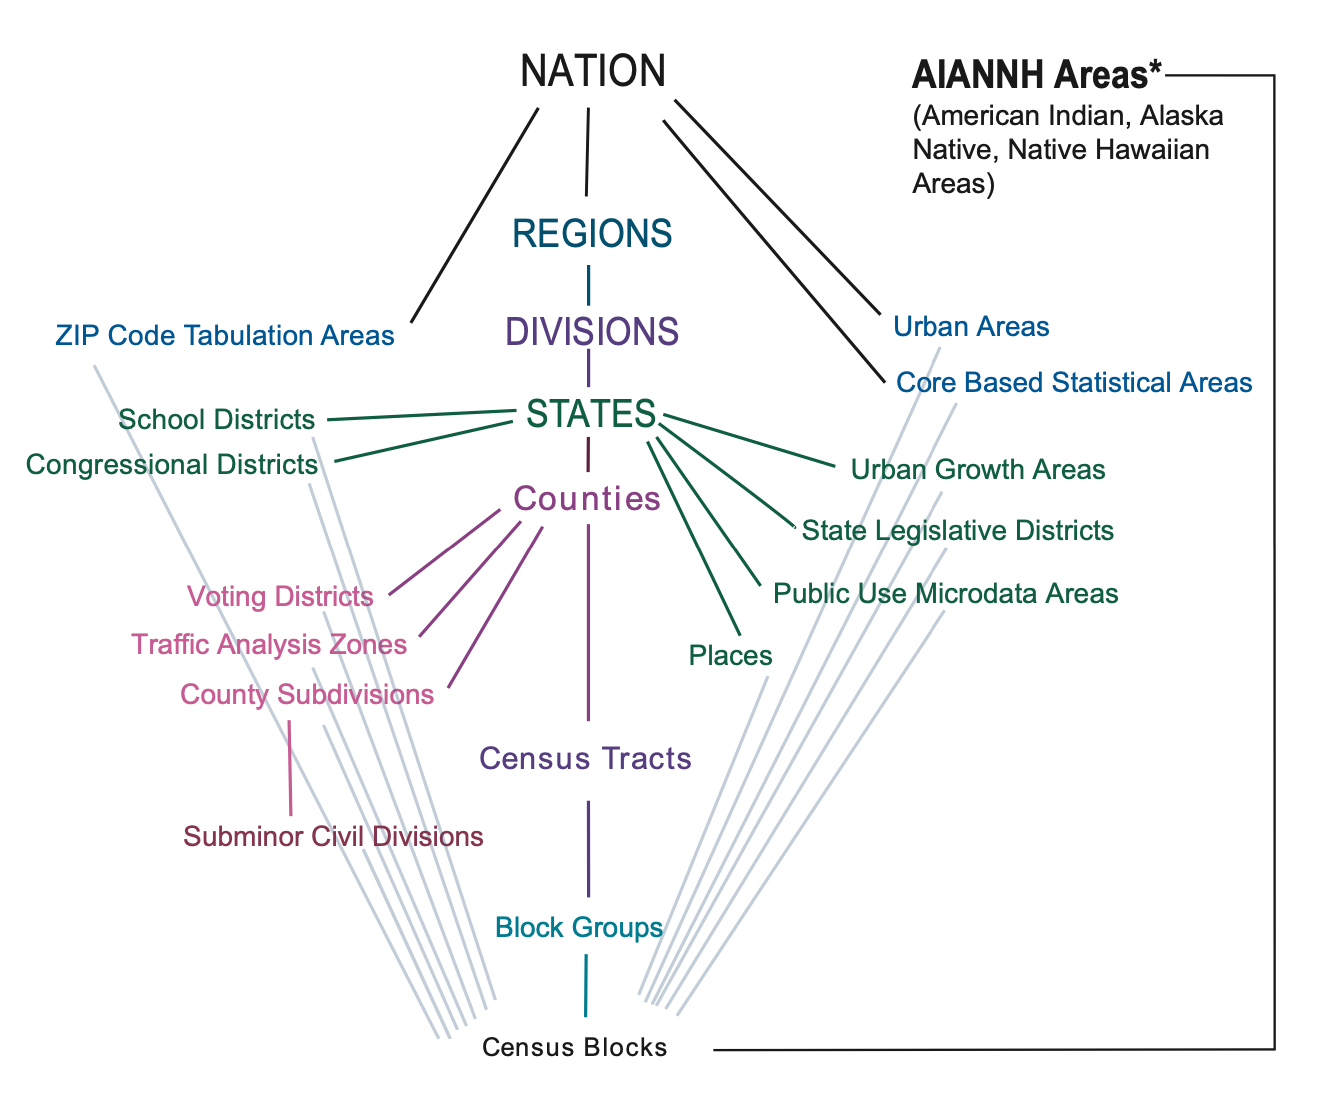 Graphical representation of the geographical categories used by the U.S. Census Bureau. The largest entity is nation, at the top of the chart. Below this are regions, divisions, states, counties, census tracts, block groups, and census blocks. Additional sub-categories that are less common are on the sides of the graph and attached via lines to their main geographical category.